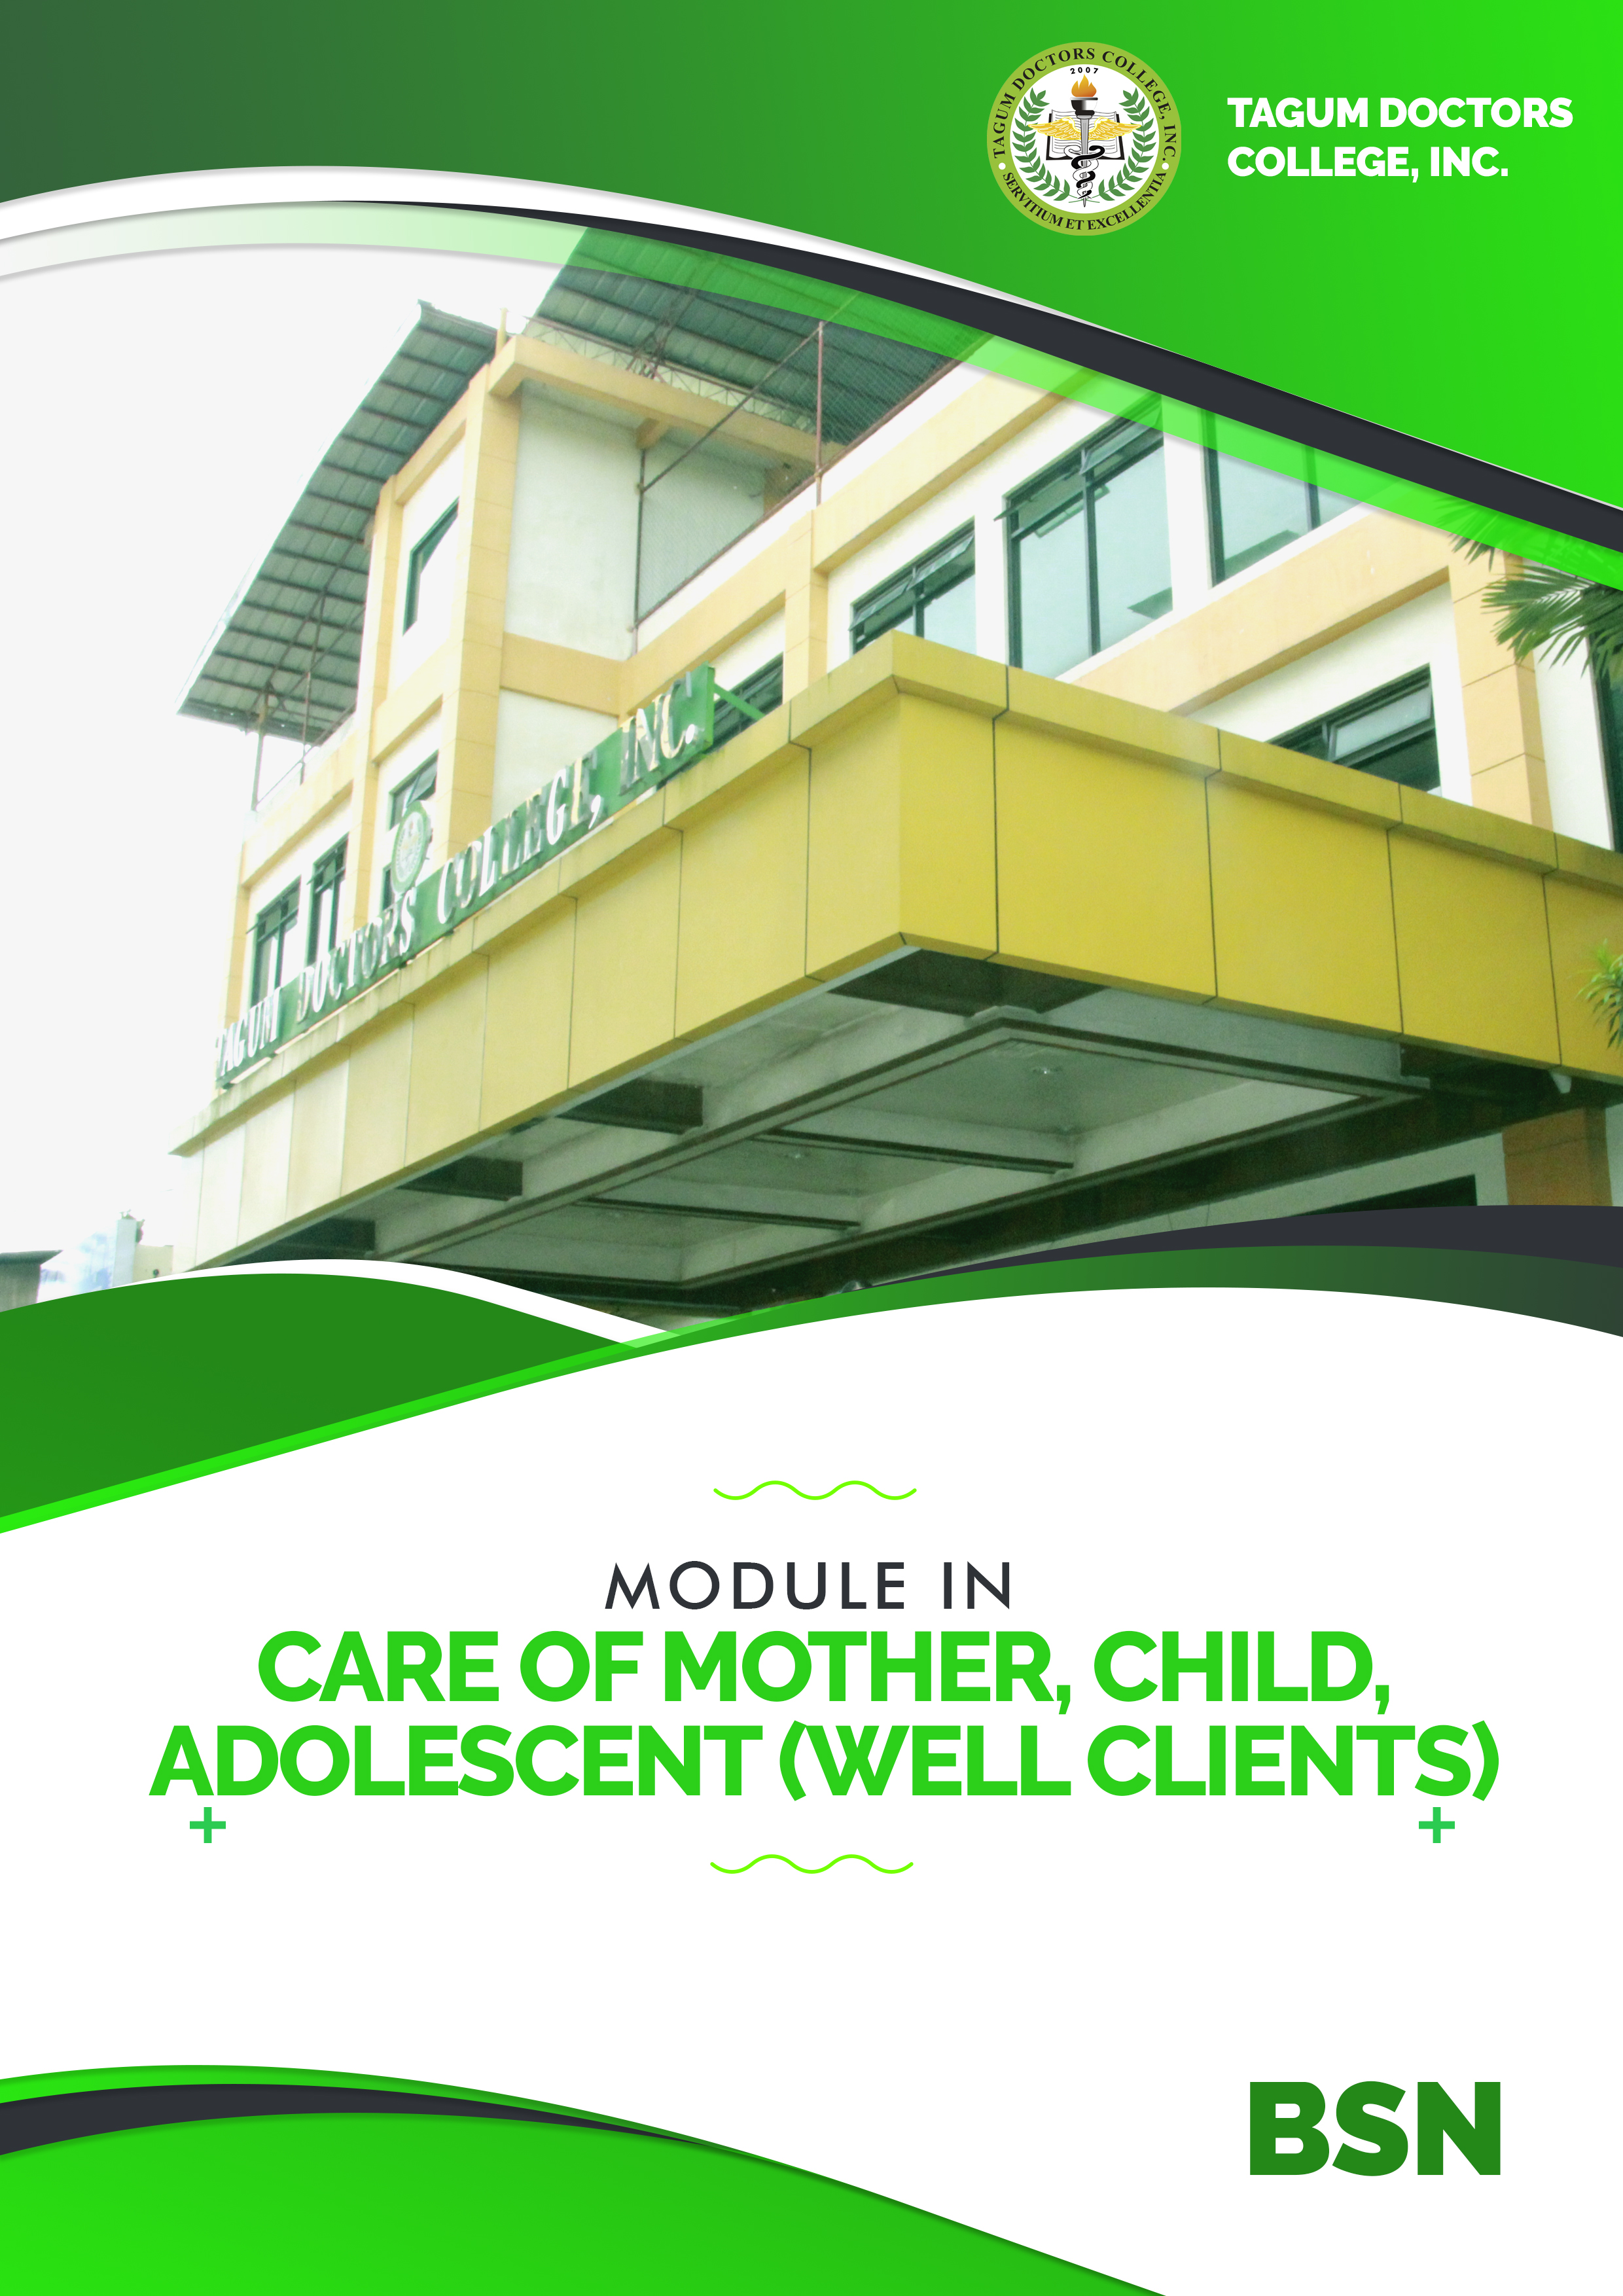 Care of Mother, Child, Adolescent (Well Clients) - BSN 2C